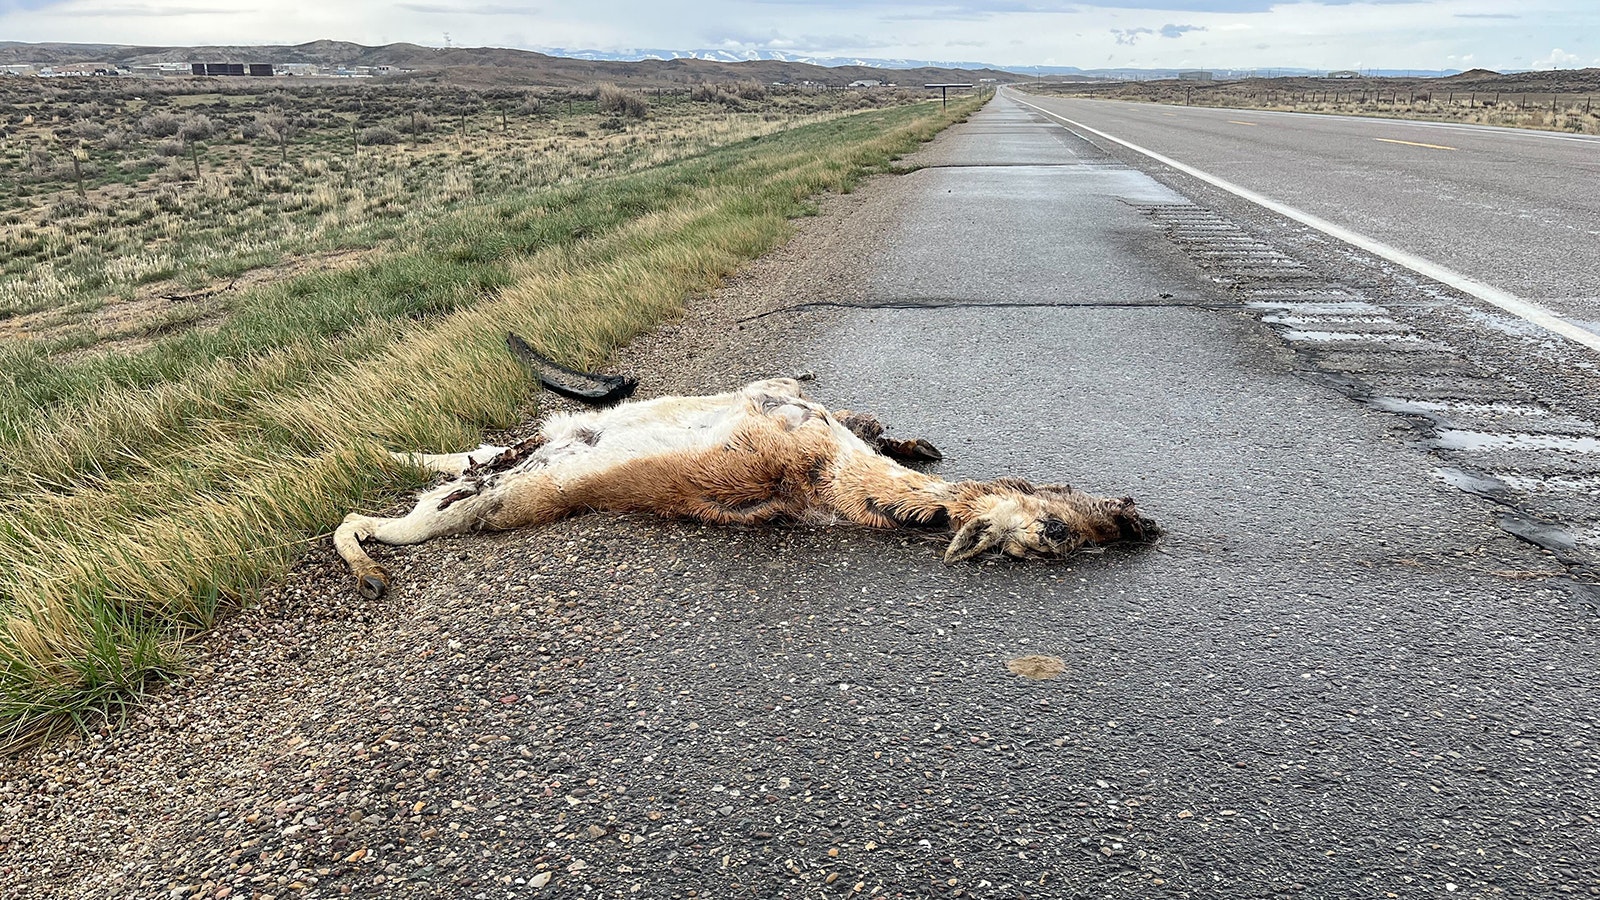 While it may be tempting to pull over and take carcasses, heads or other parts of wildlife from alongside roads, it's illegal without an $8 permit.